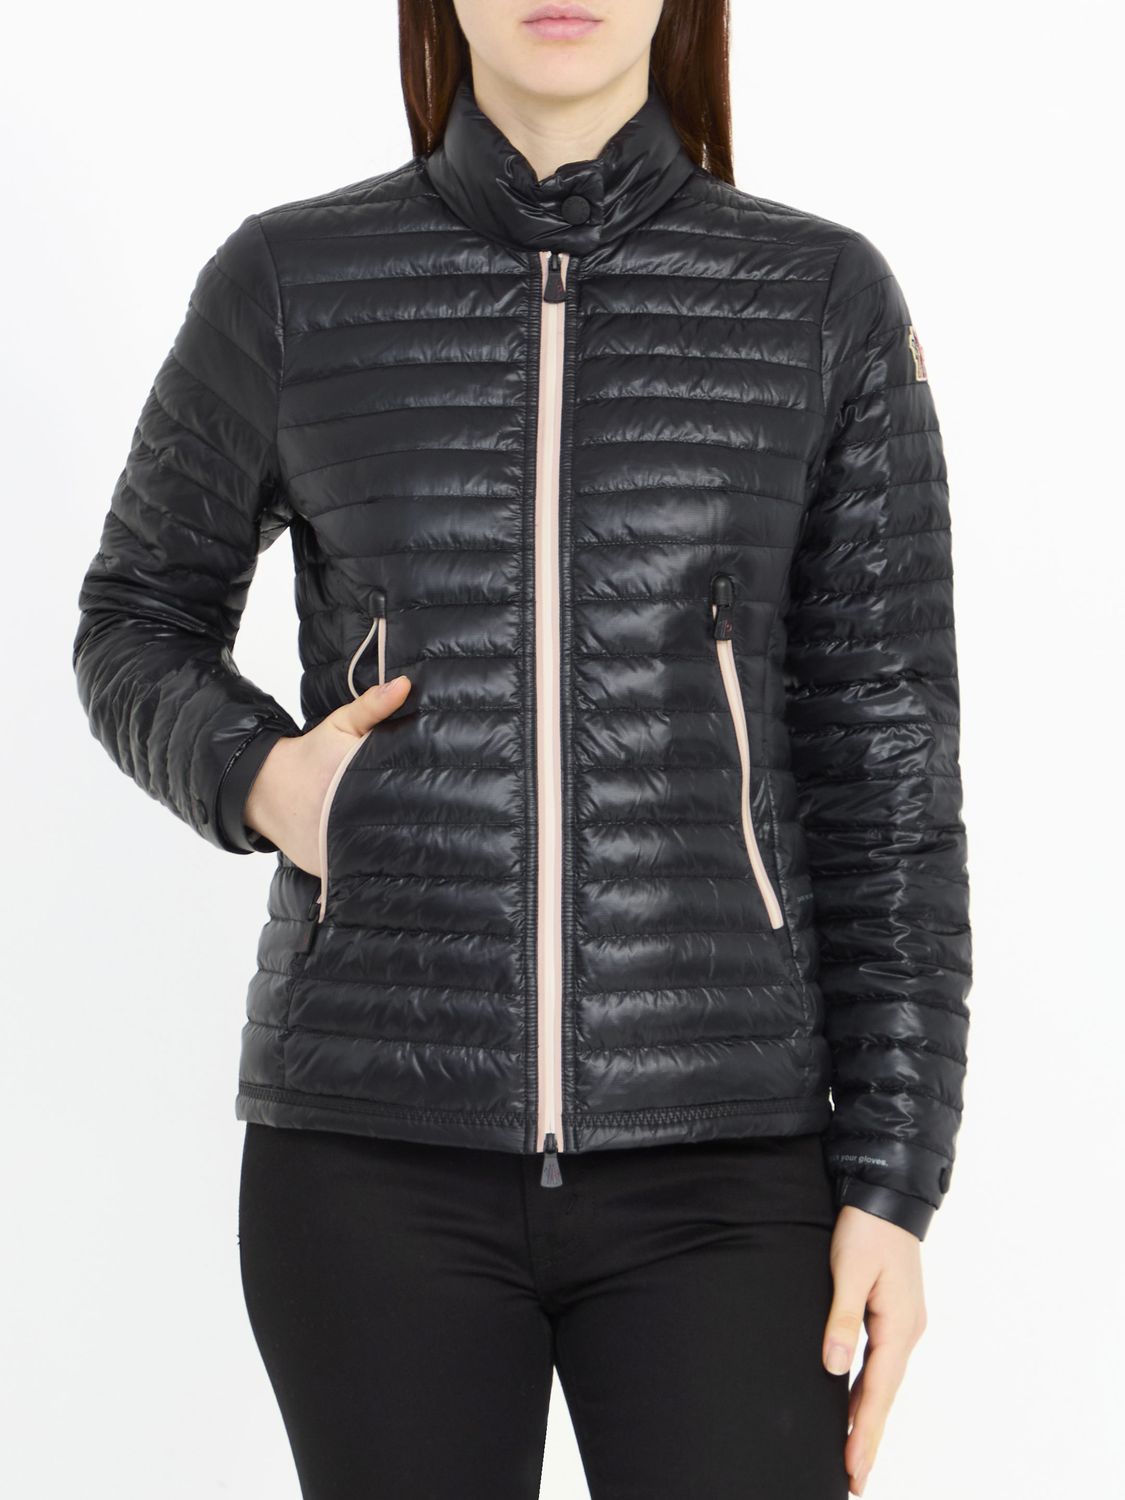 MONCLER GRENOBLE Lightweight Waterproof Jacket for Women - High Collar, Foldable & Iconic Logo Sleeve Patch